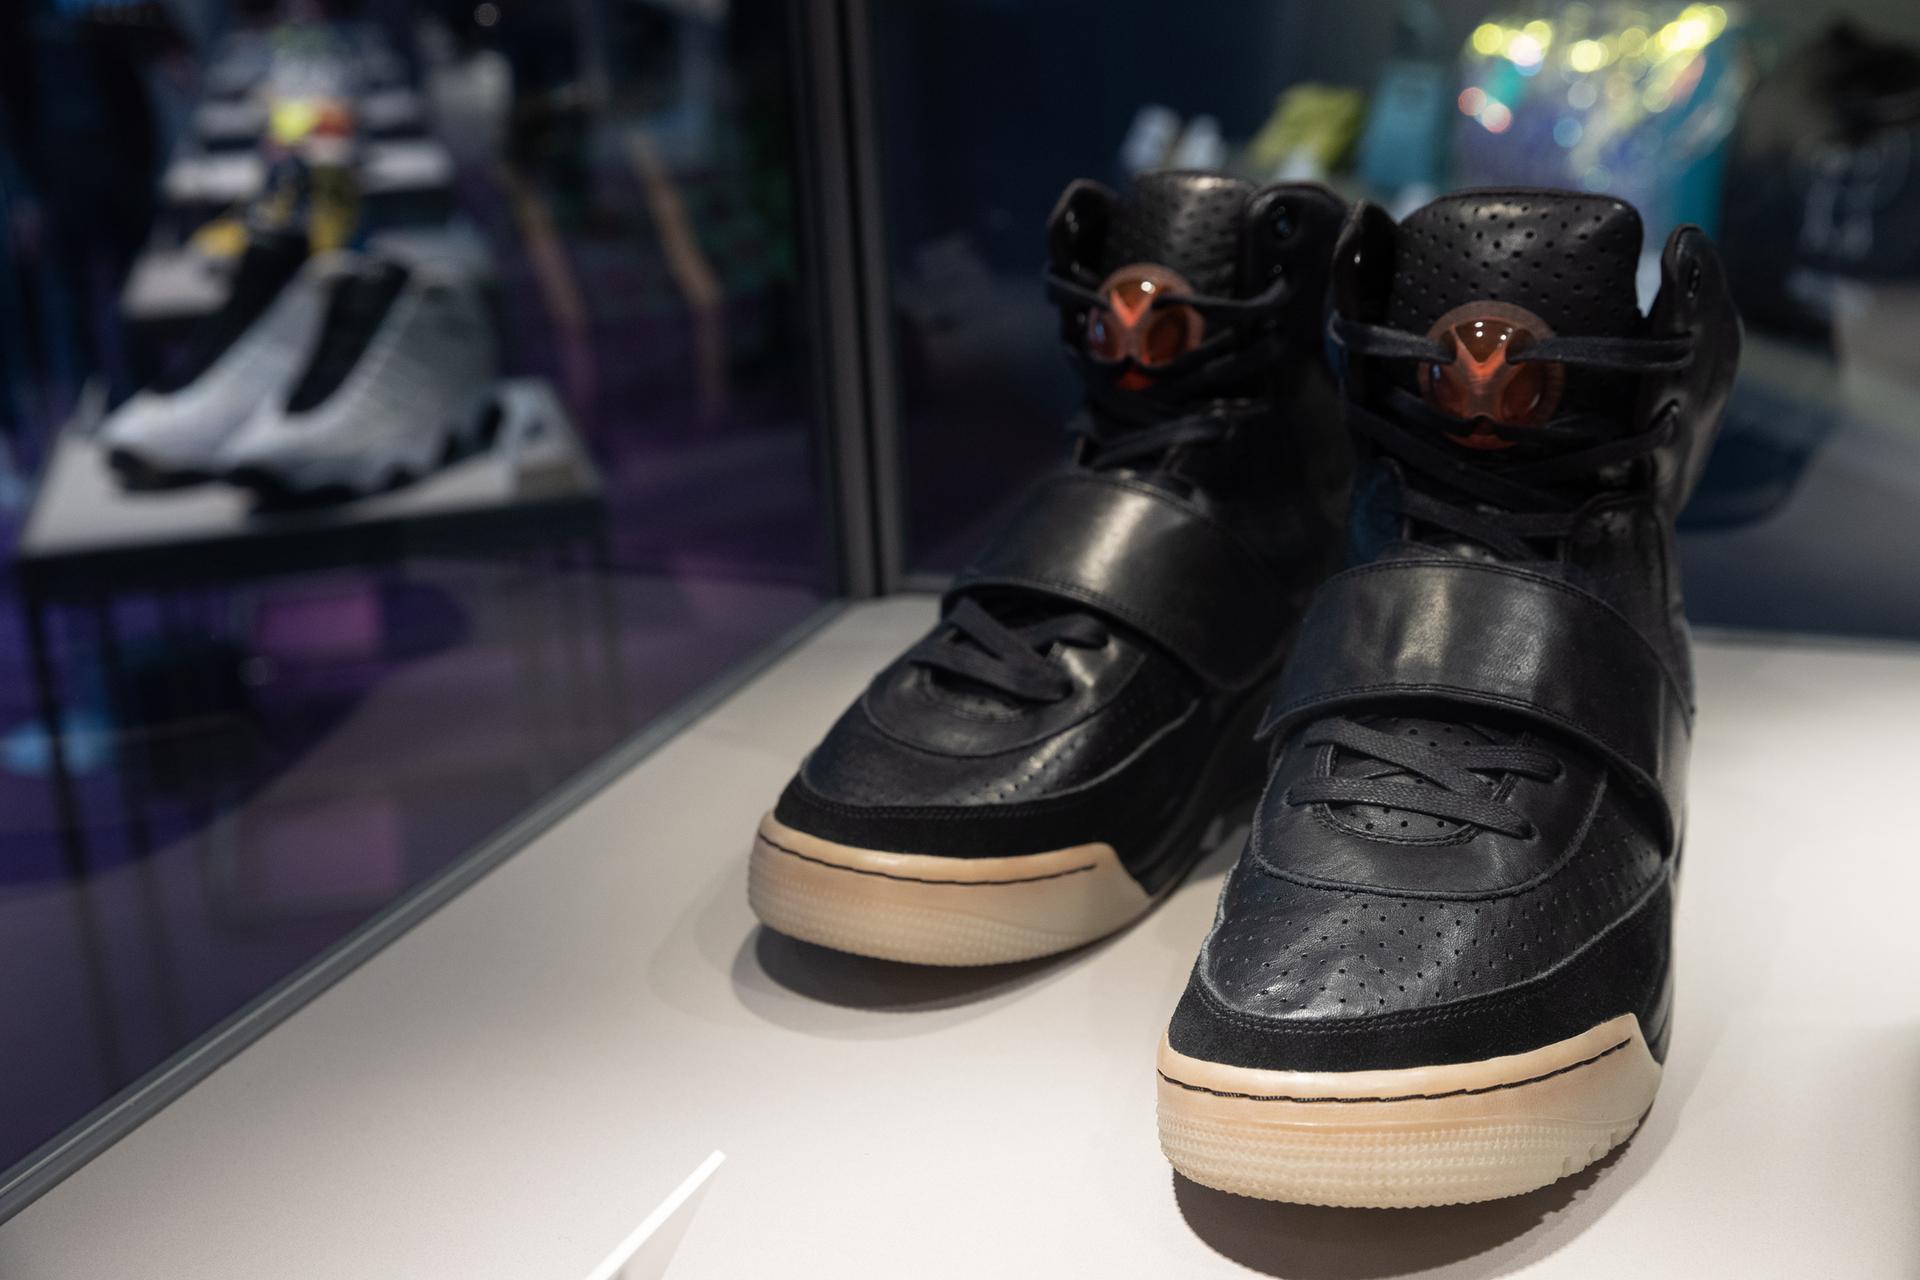 Kanye West sneakers fetch record $1.8 million at private sale